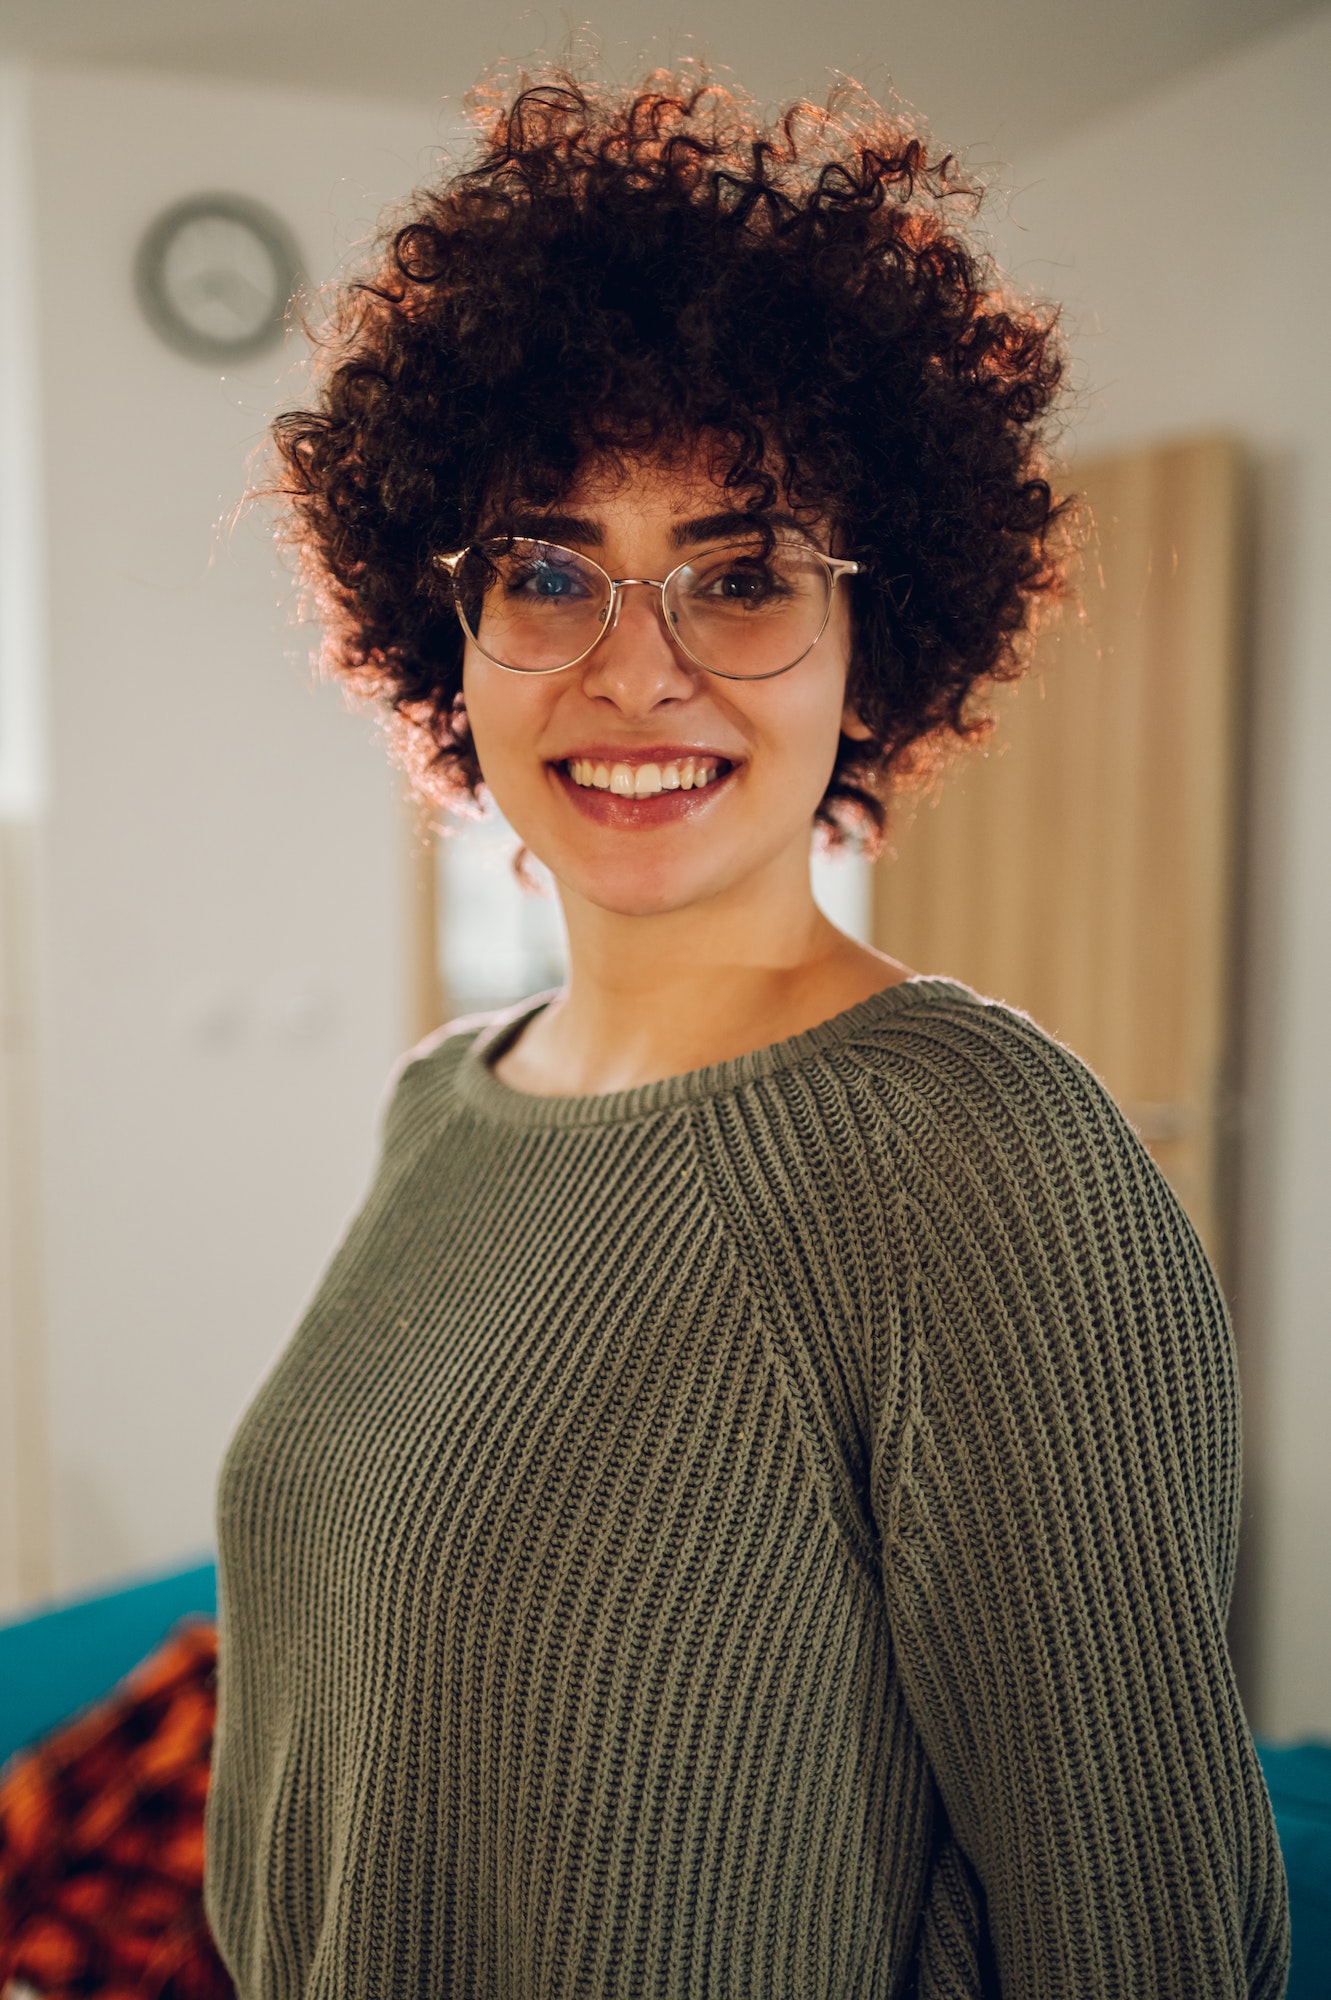 Portrait of a beautiful caucasian woman with afro hairstyle wearing eyeglasses